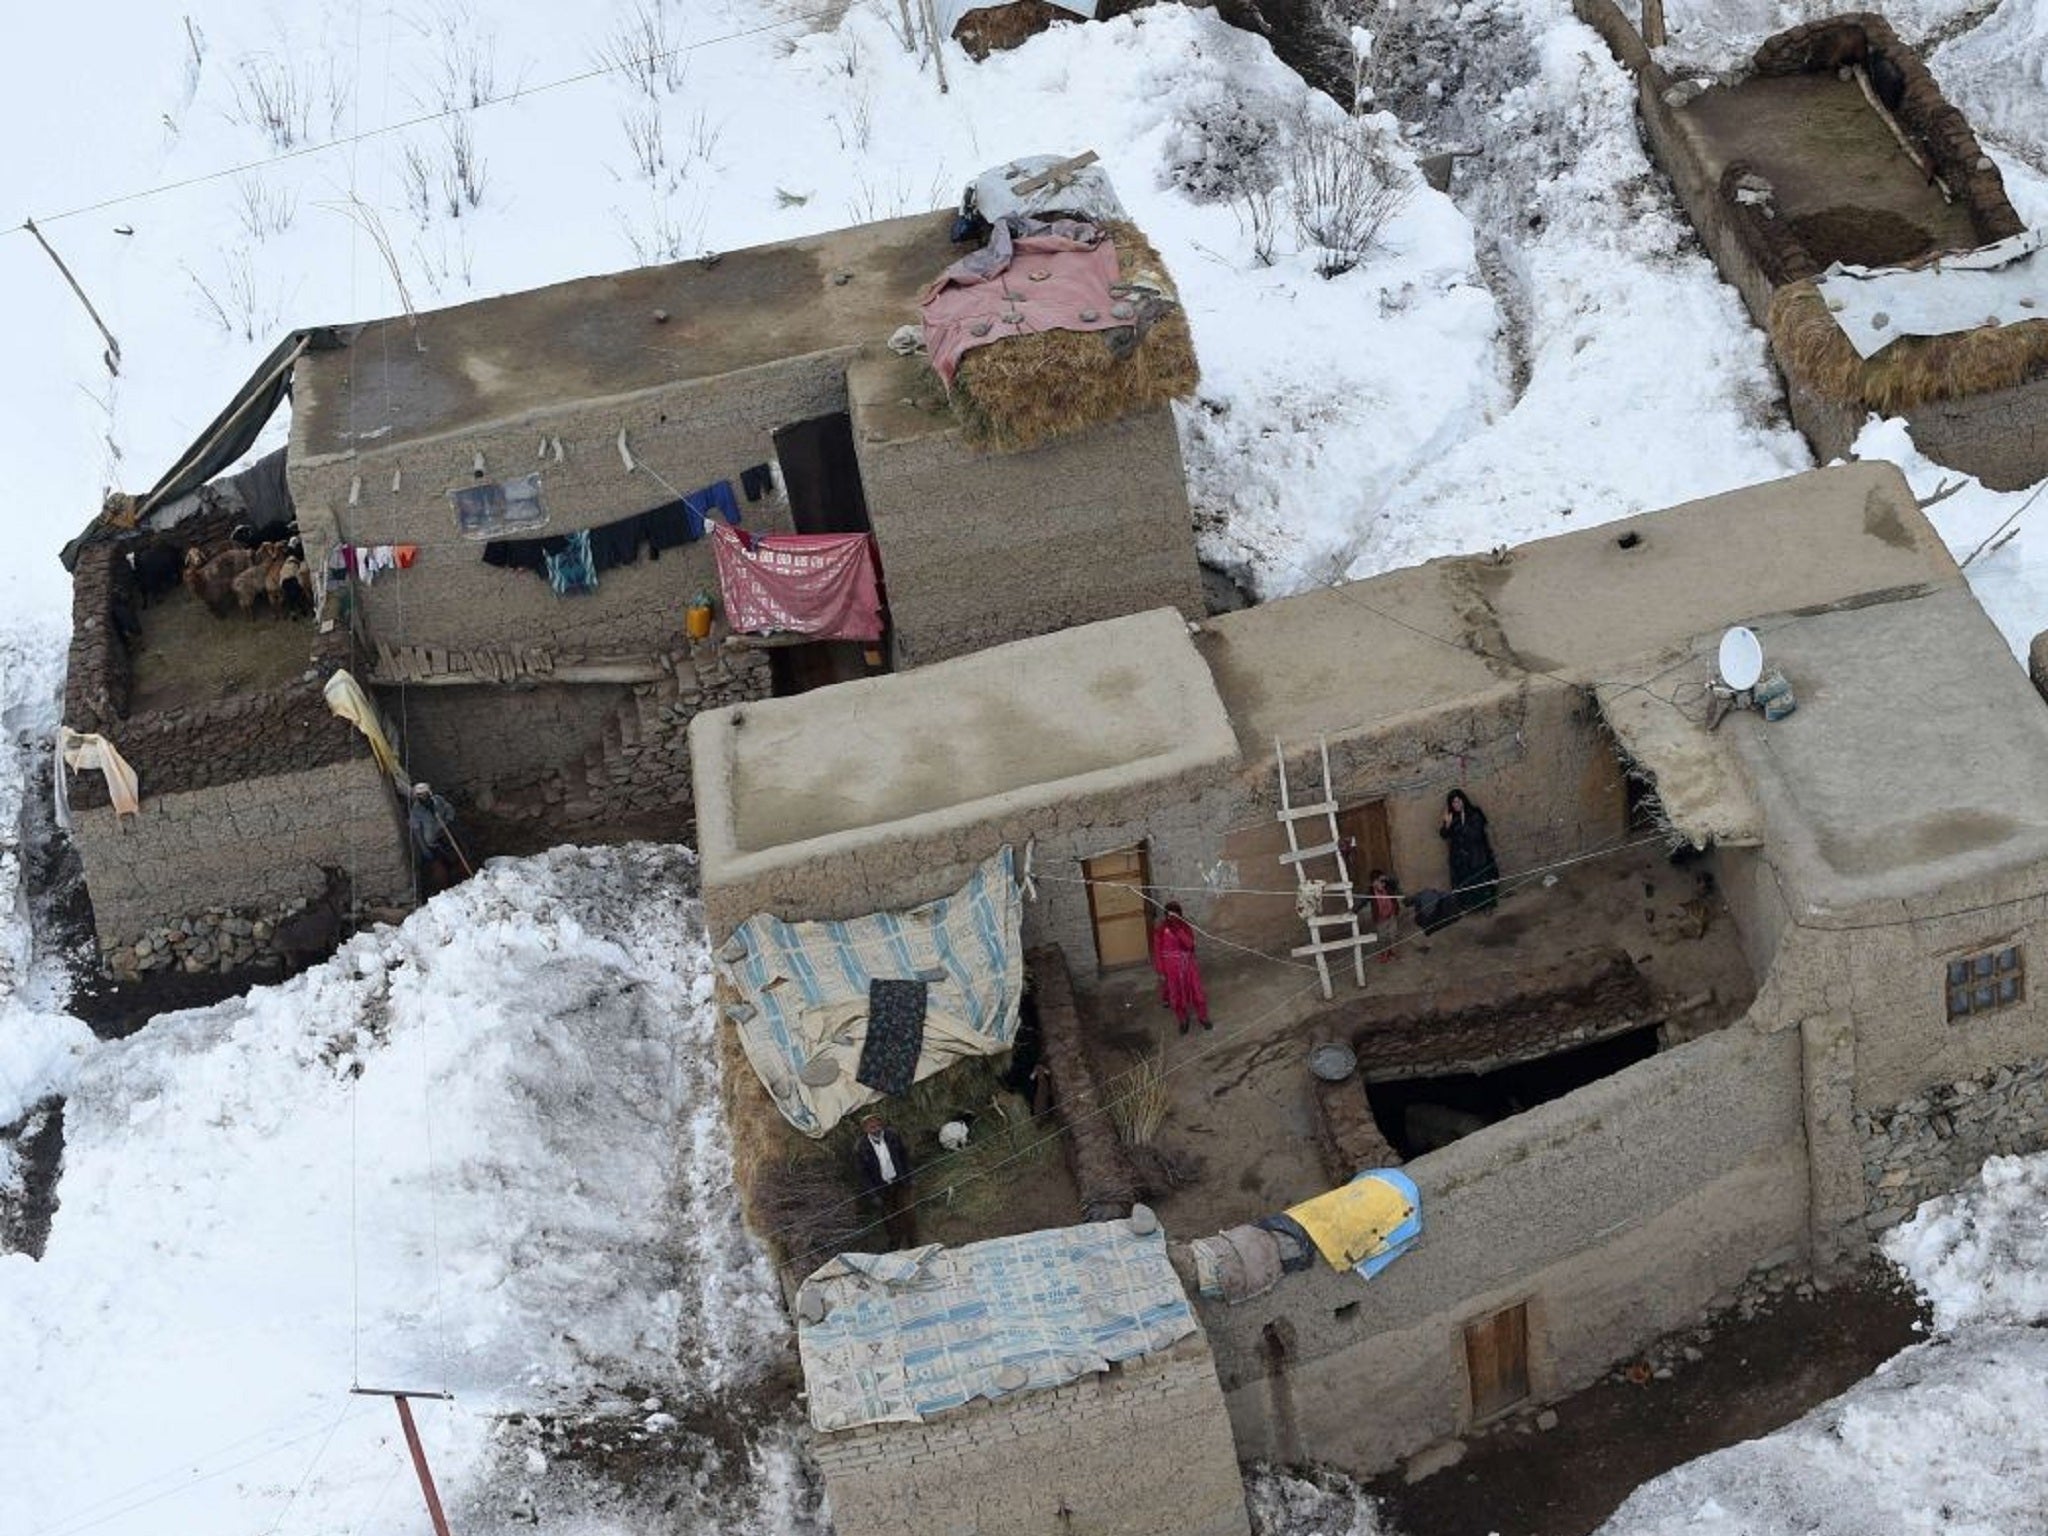 A few of the remaining homes out of the ones that have been damaged or destroyed by avalanches in Afghanistan